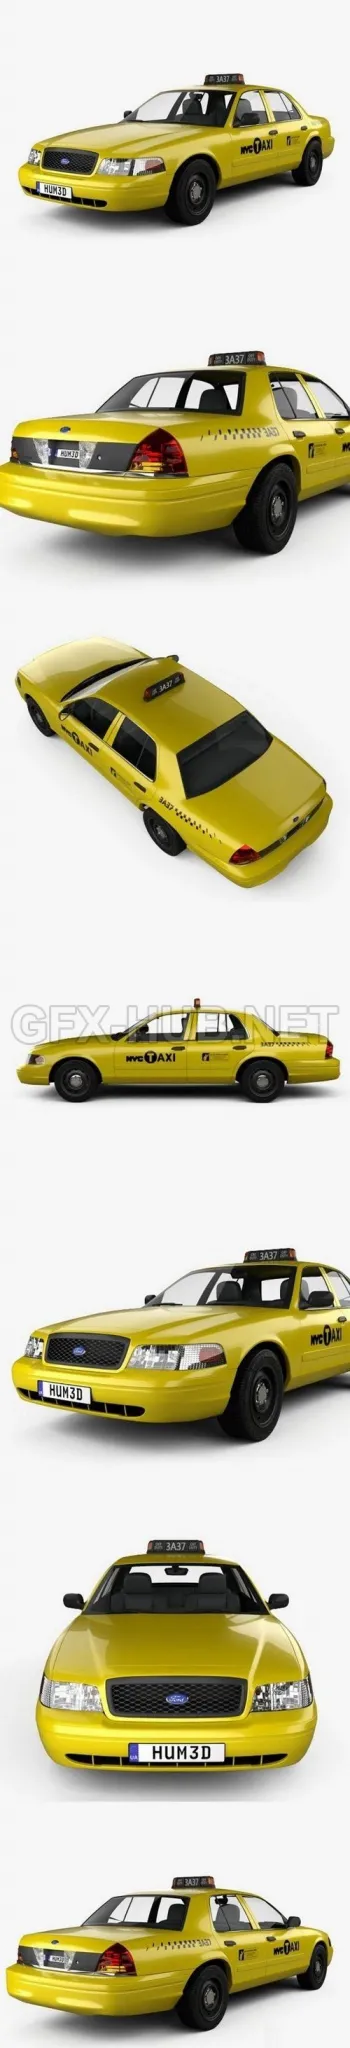 CAR – Ford Crown Victoria New York Taxi 2005  3D Model